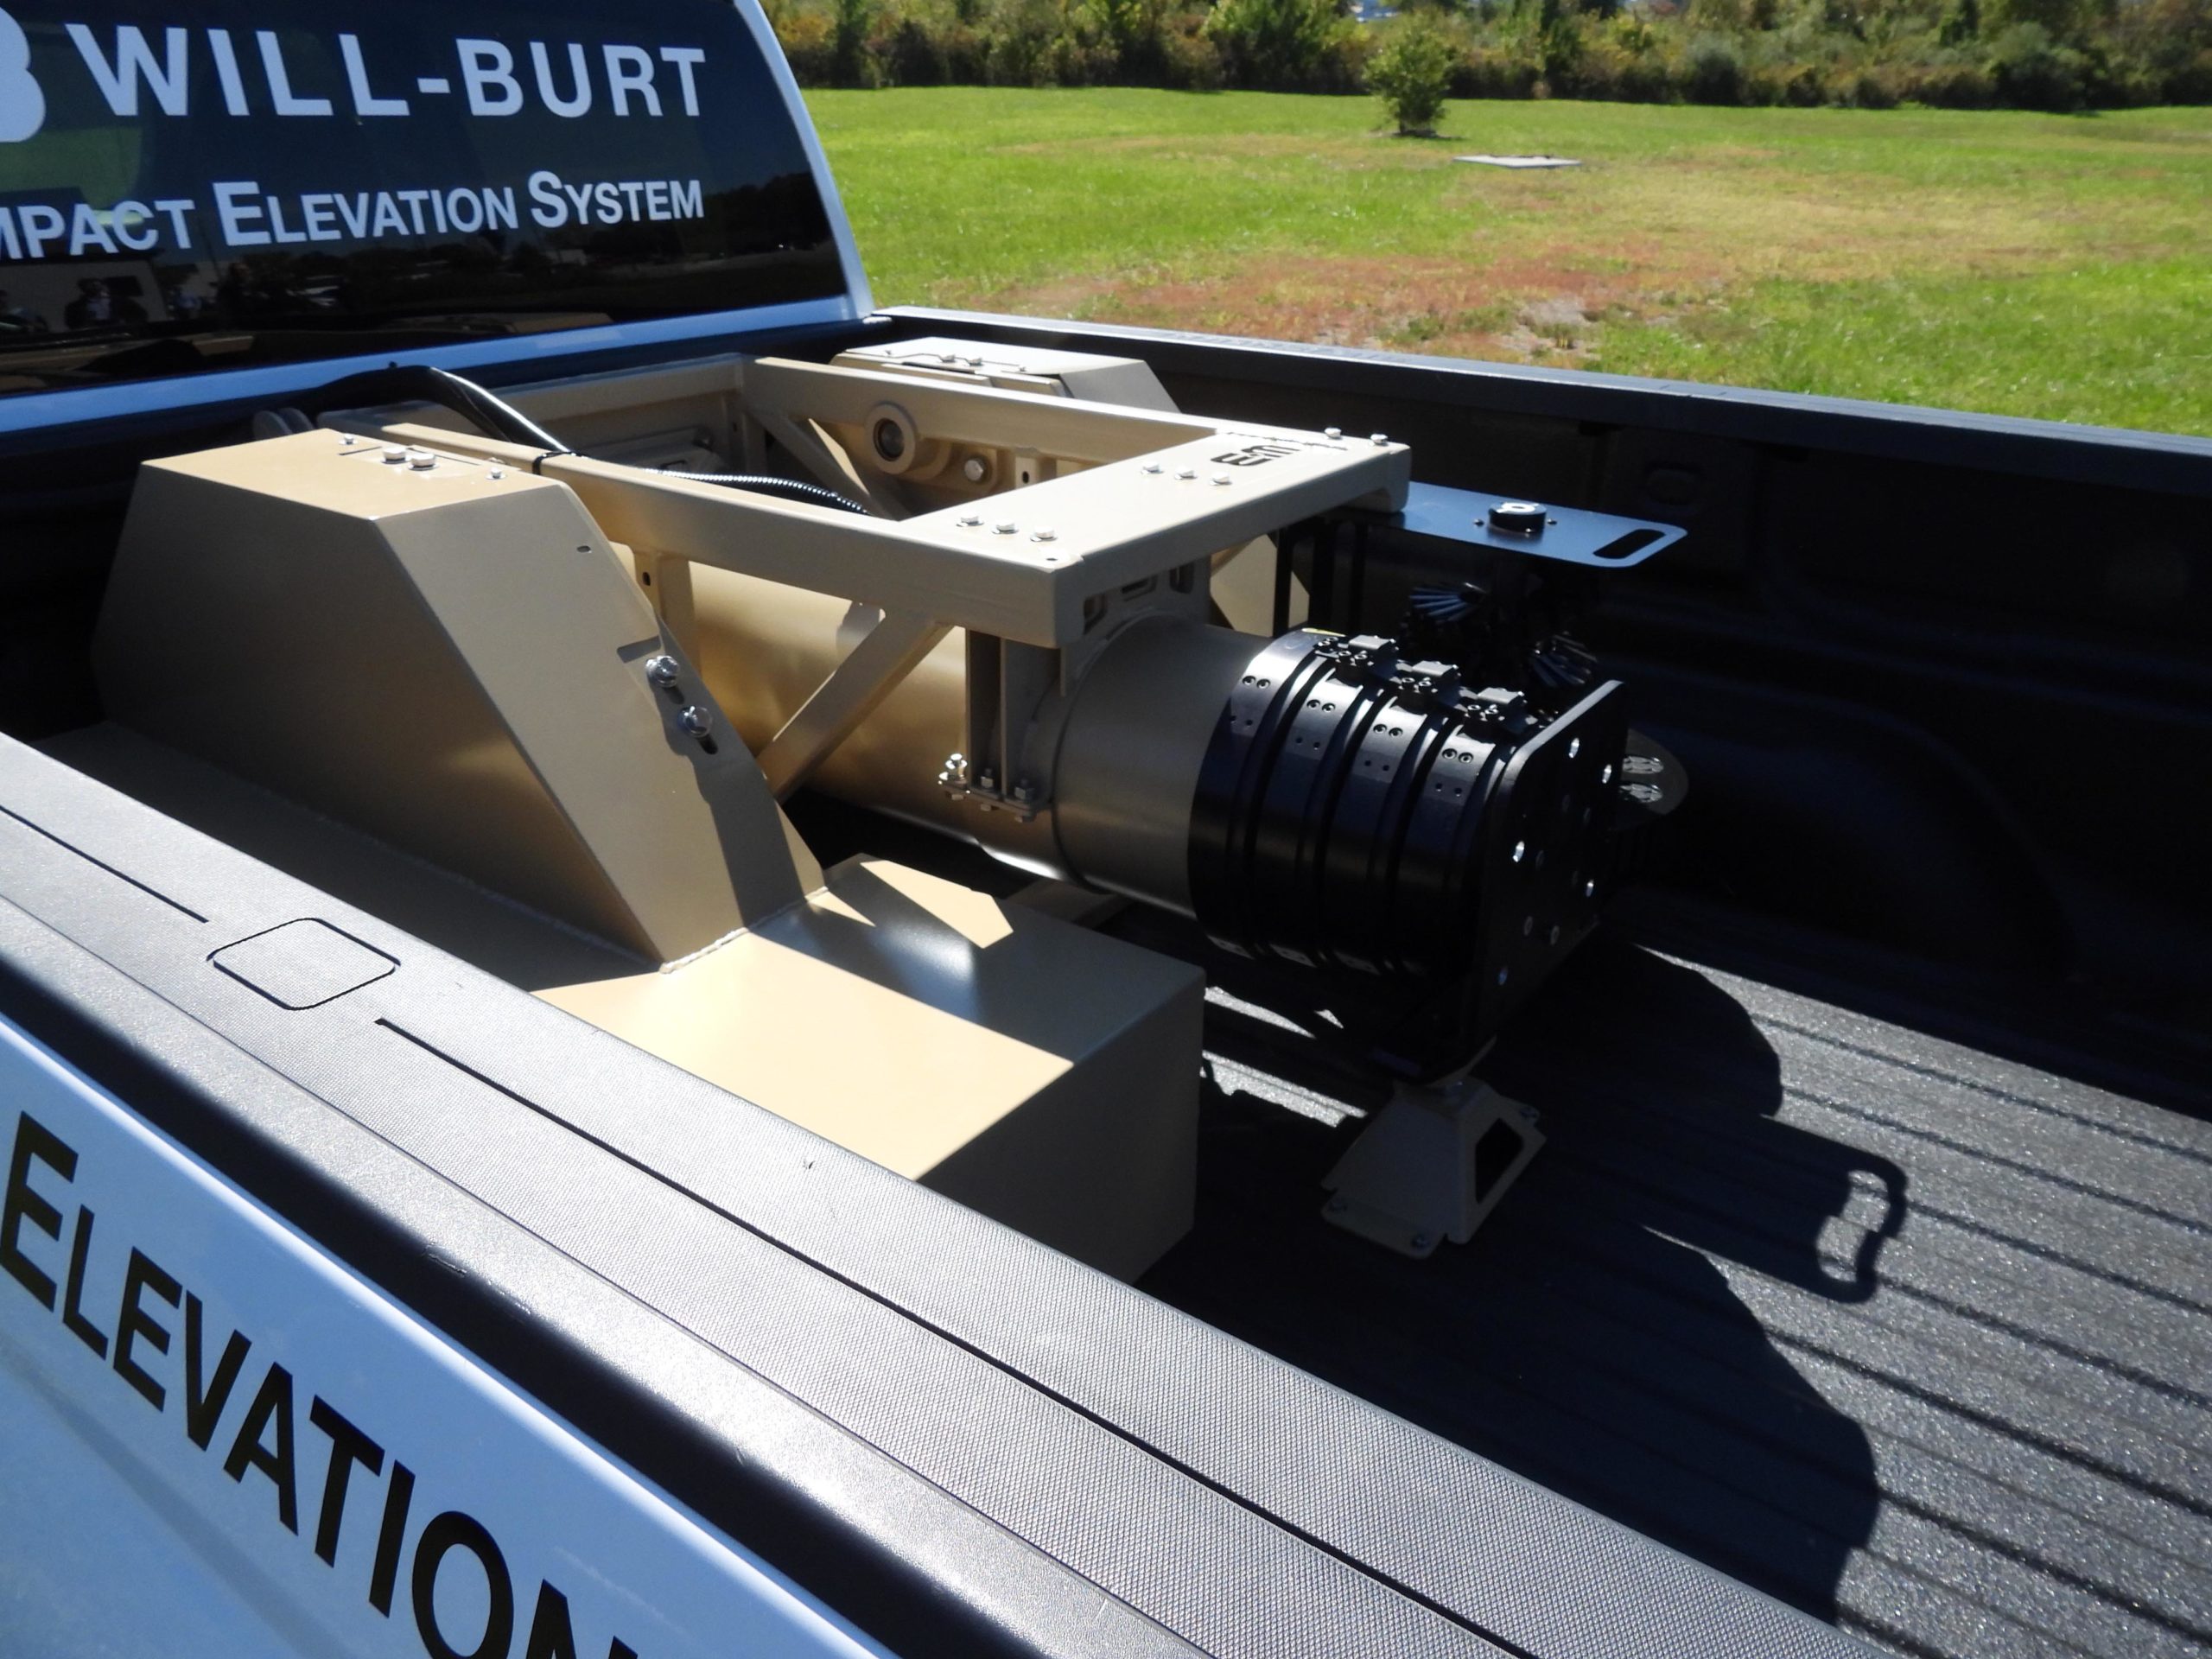 Will-Burt’s Compact Elevation System is a rugged and precise mobile elevation platform that provides rapid deployment of a wide variety of sensors from a compact position in a standard 8’ pickup truck bed.